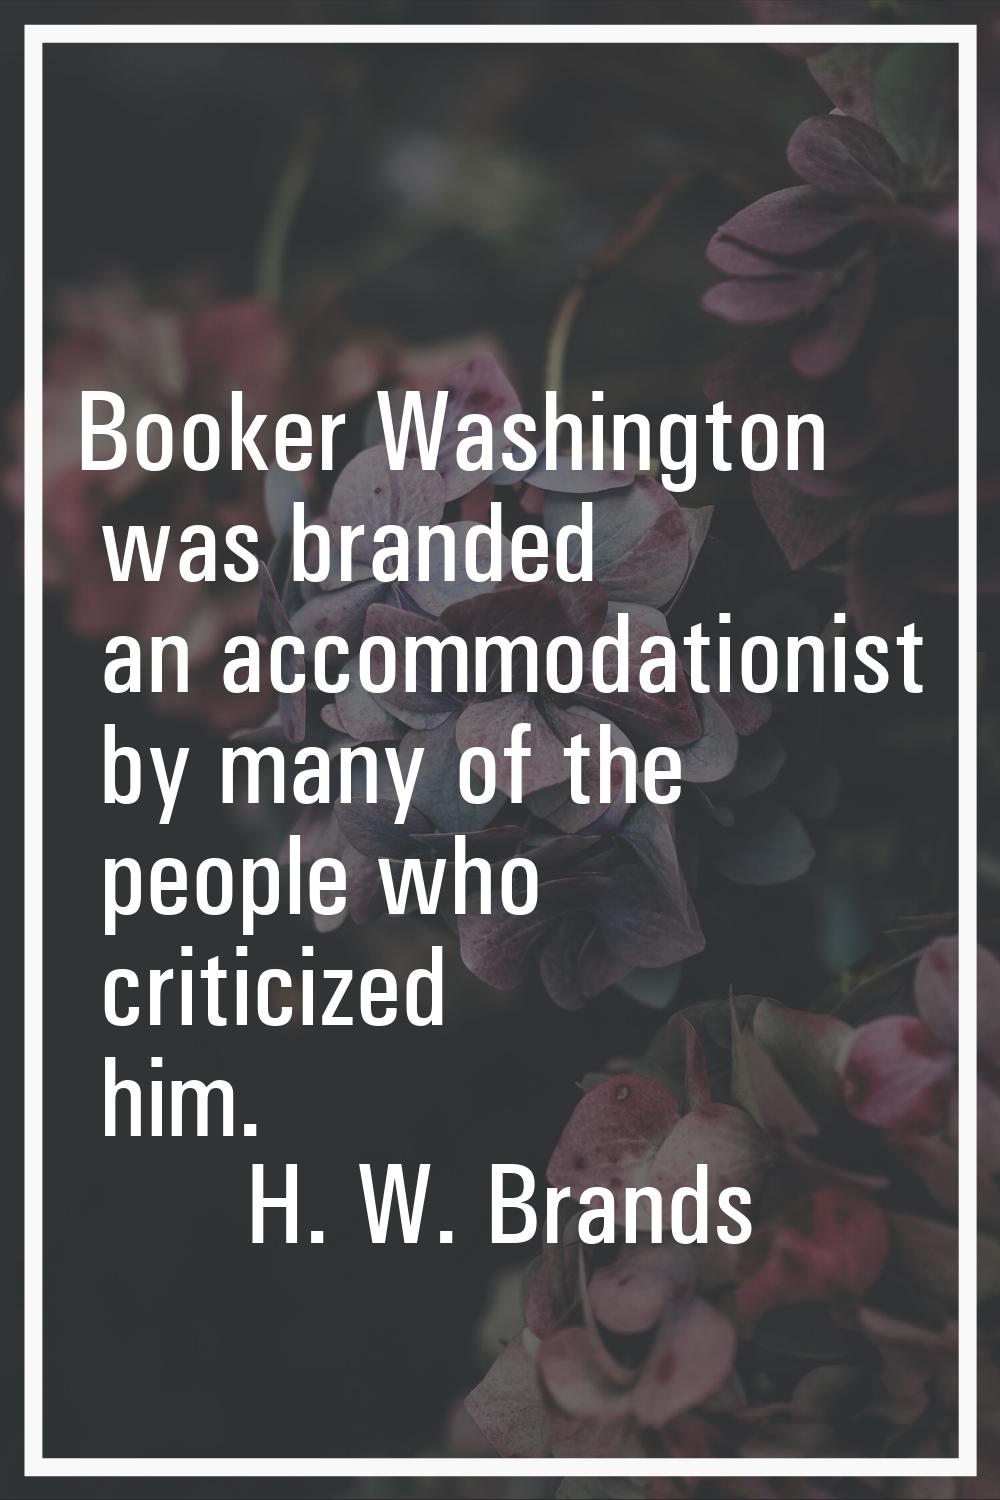 Booker Washington was branded an accommodationist by many of the people who criticized him.